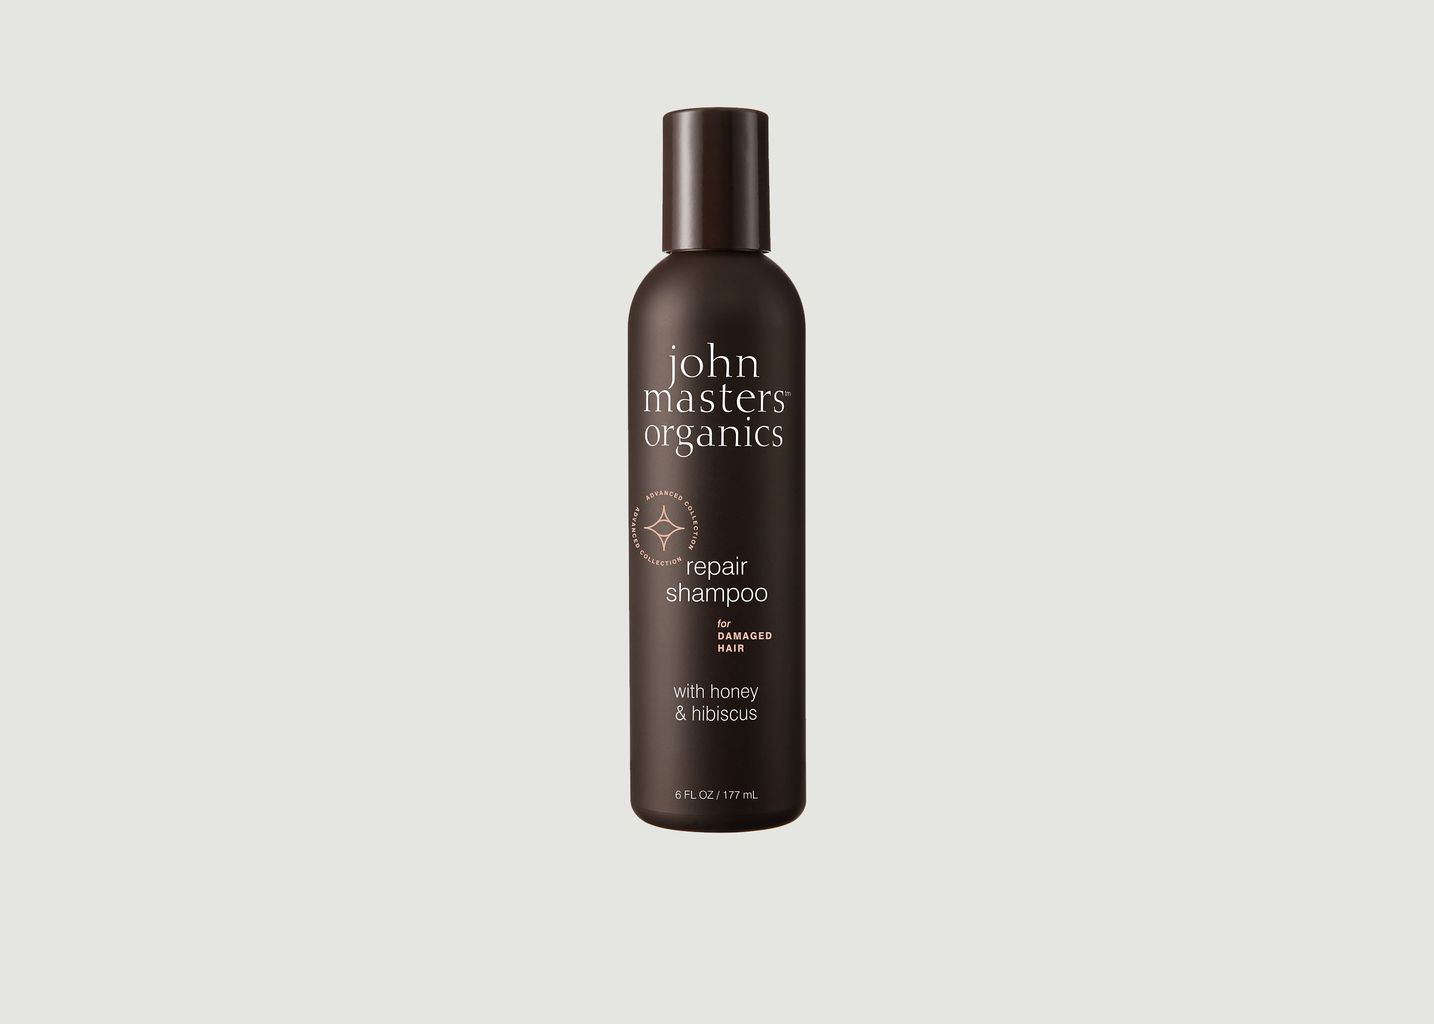 Shampoo for damaged hair with honey and hibiscus - John Masters Organics